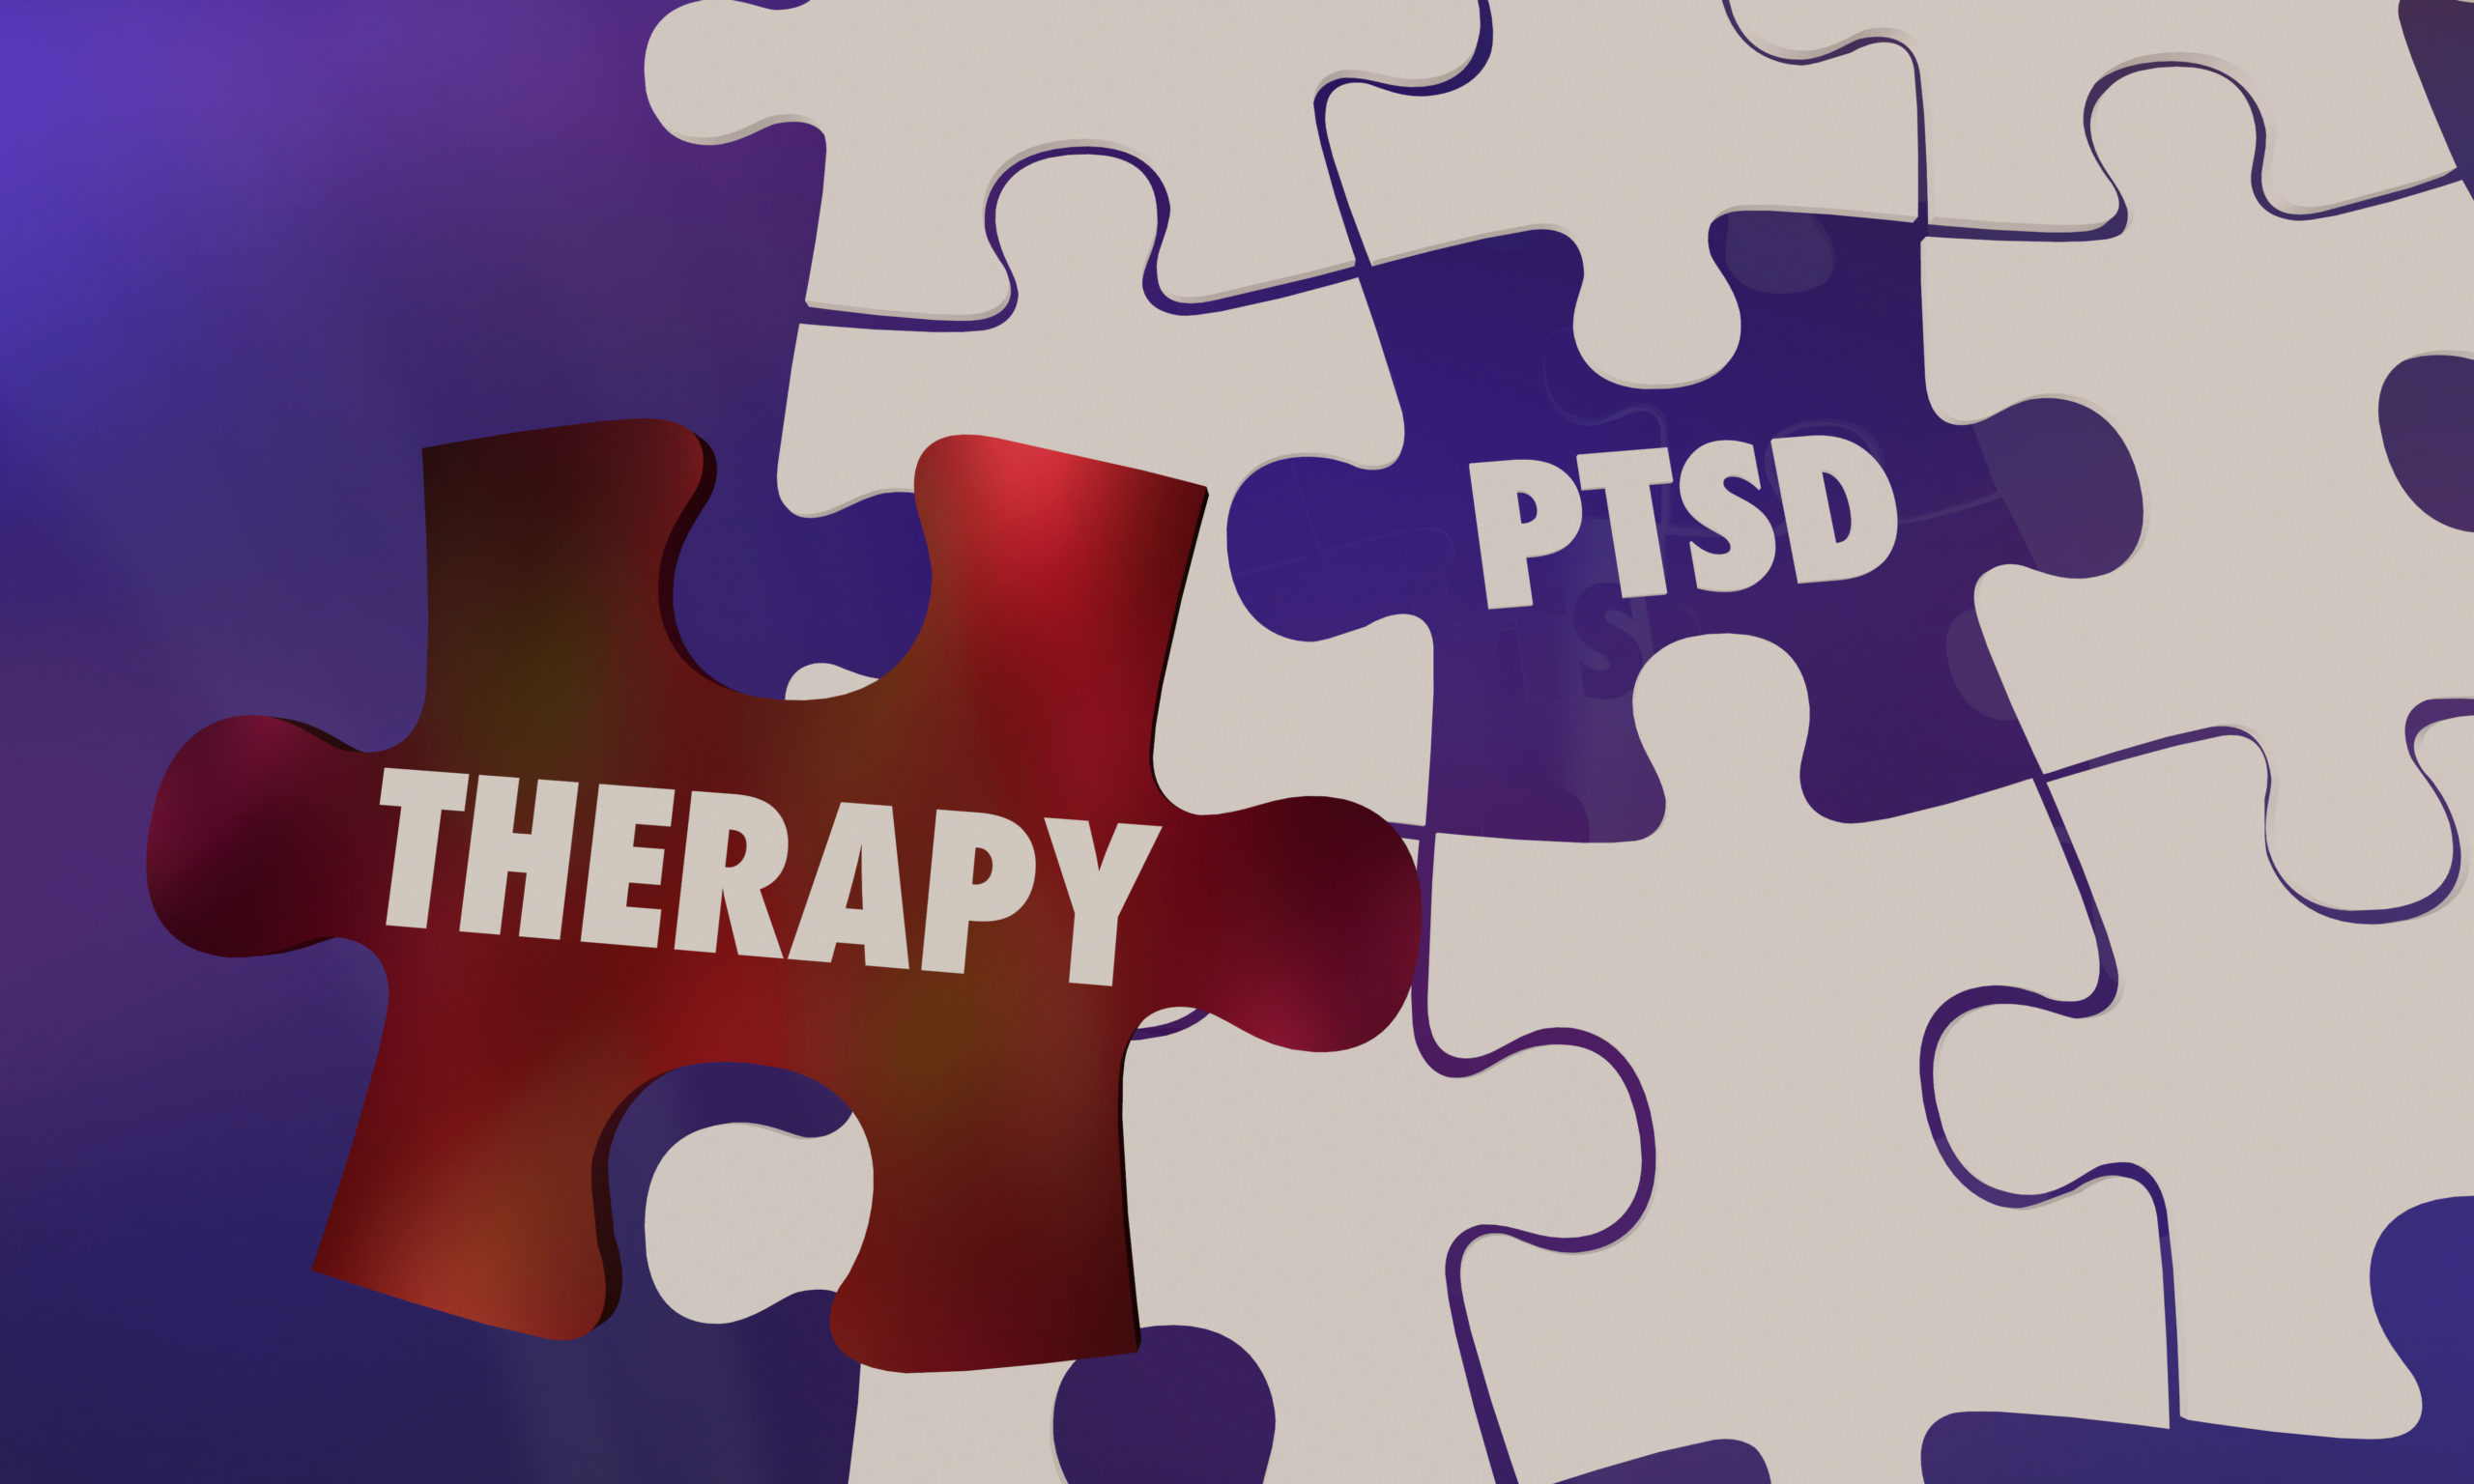 Featured image for “How do we know when posttraumatic stress disorder is getting better?”